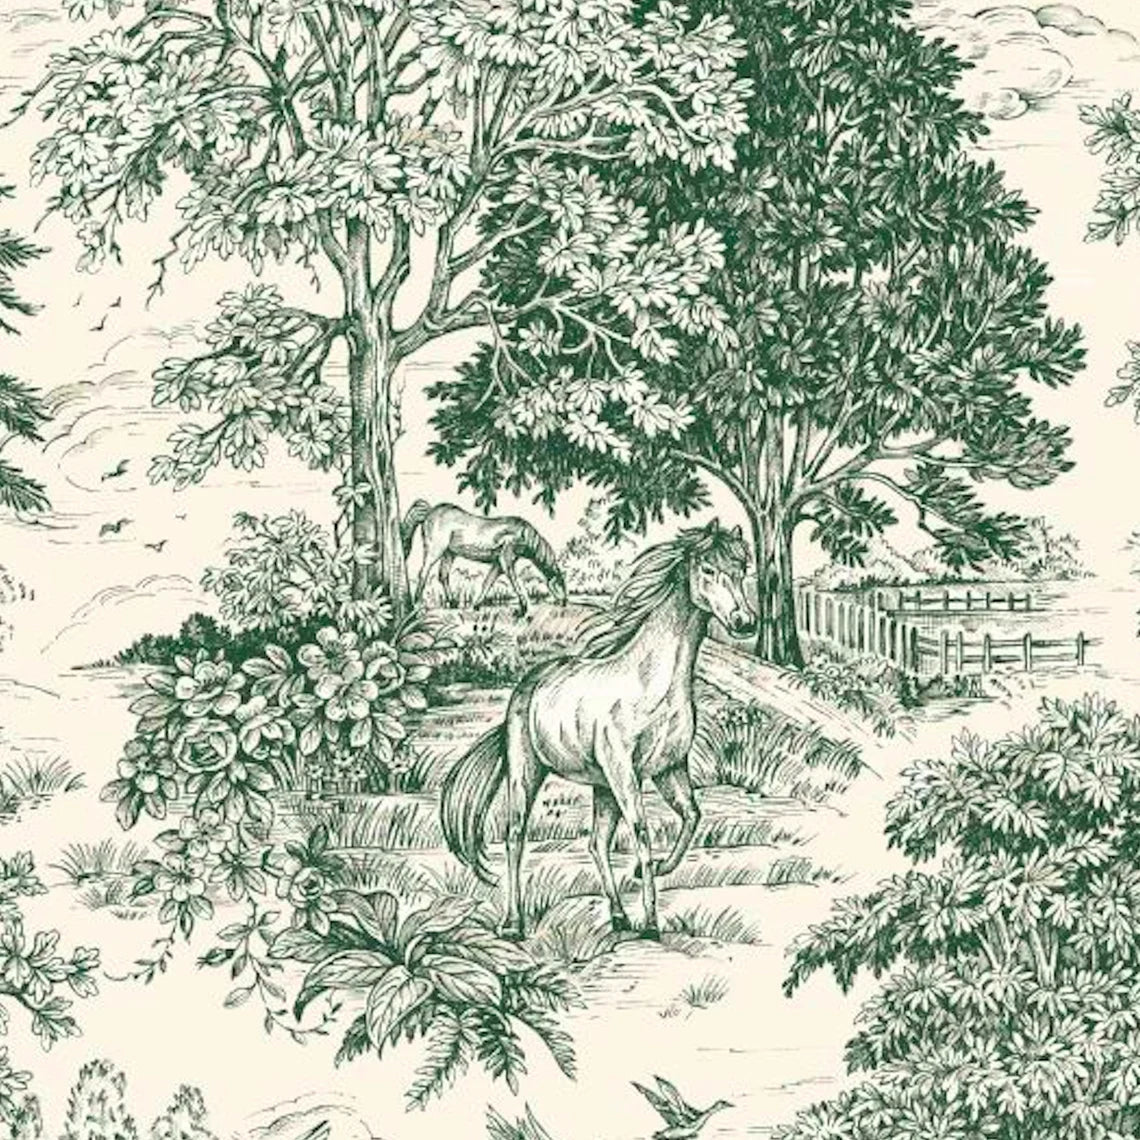 tab top curtain panels pair in Yellowstone Classic Green Country Toile- Horses, Deer, Dogs- Large Scale